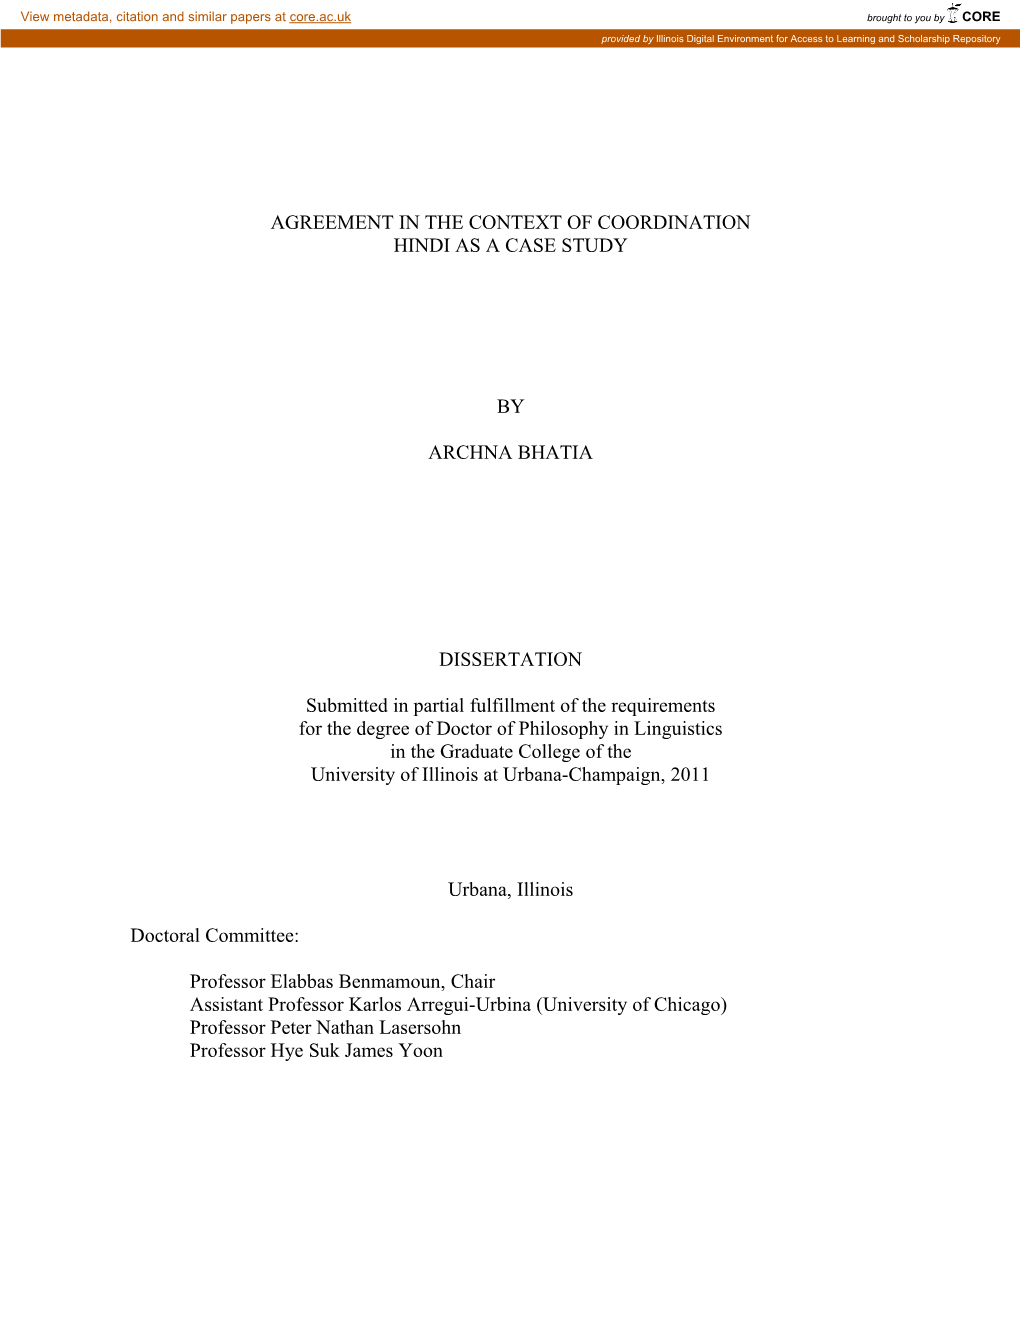 AGREEMENT in the CONTEXT of COORDINATION HINDI AS a CASE STUDY by ARCHNA BHATIA DISSERTATION Submitted in Partial Fulfillment Of